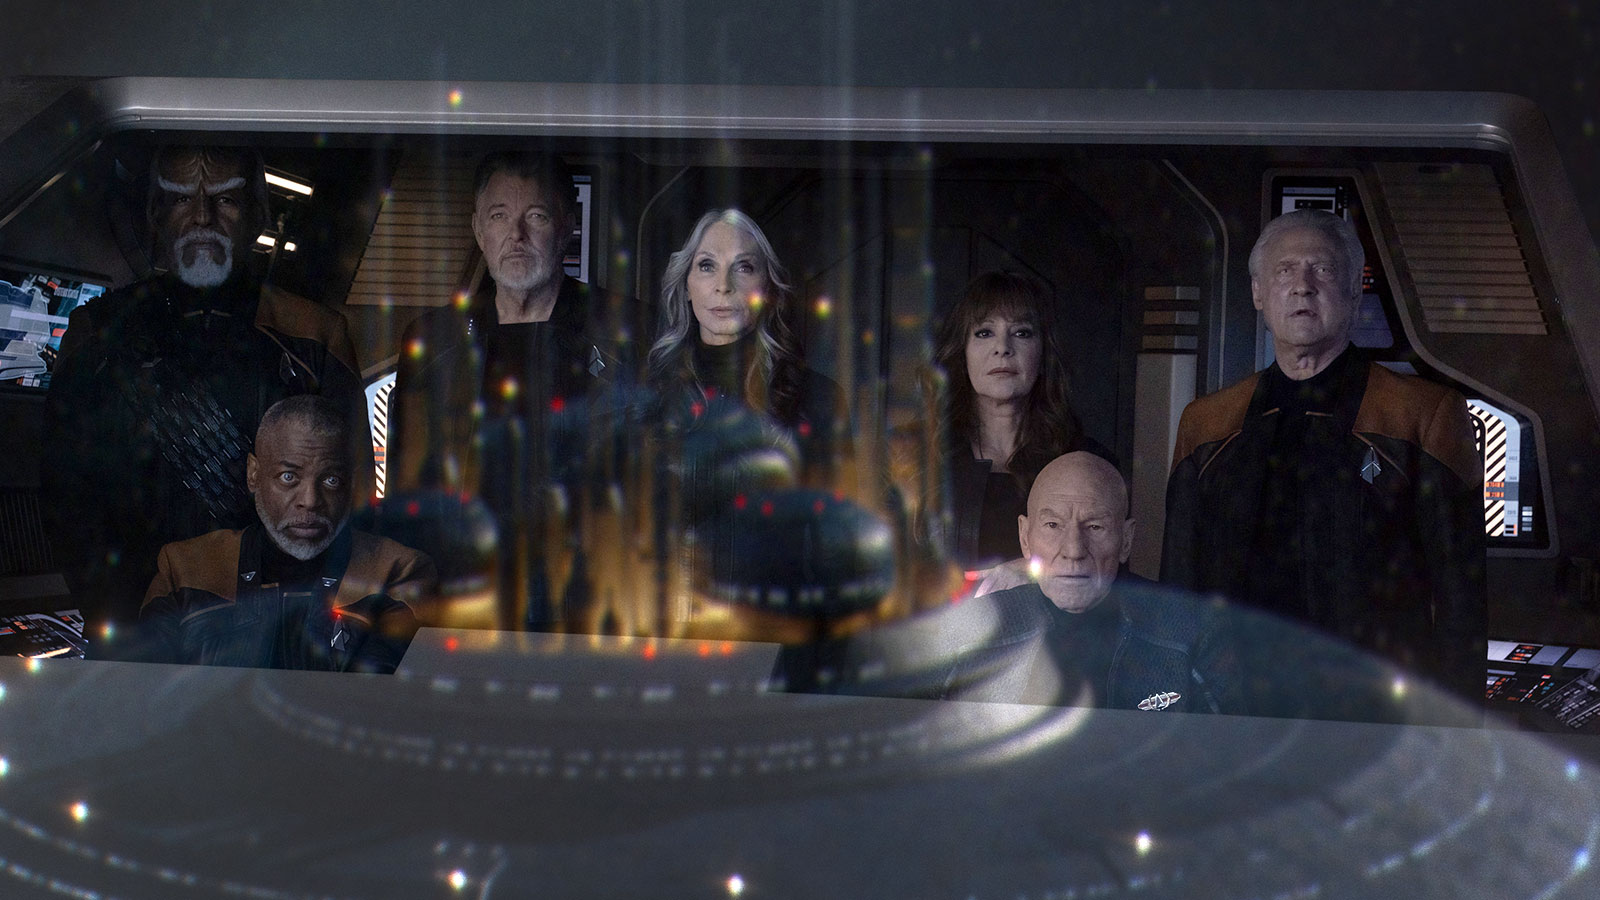 Star Trek: Picard Season 3 Episode 9 “Võx” Review: There’s no place like home